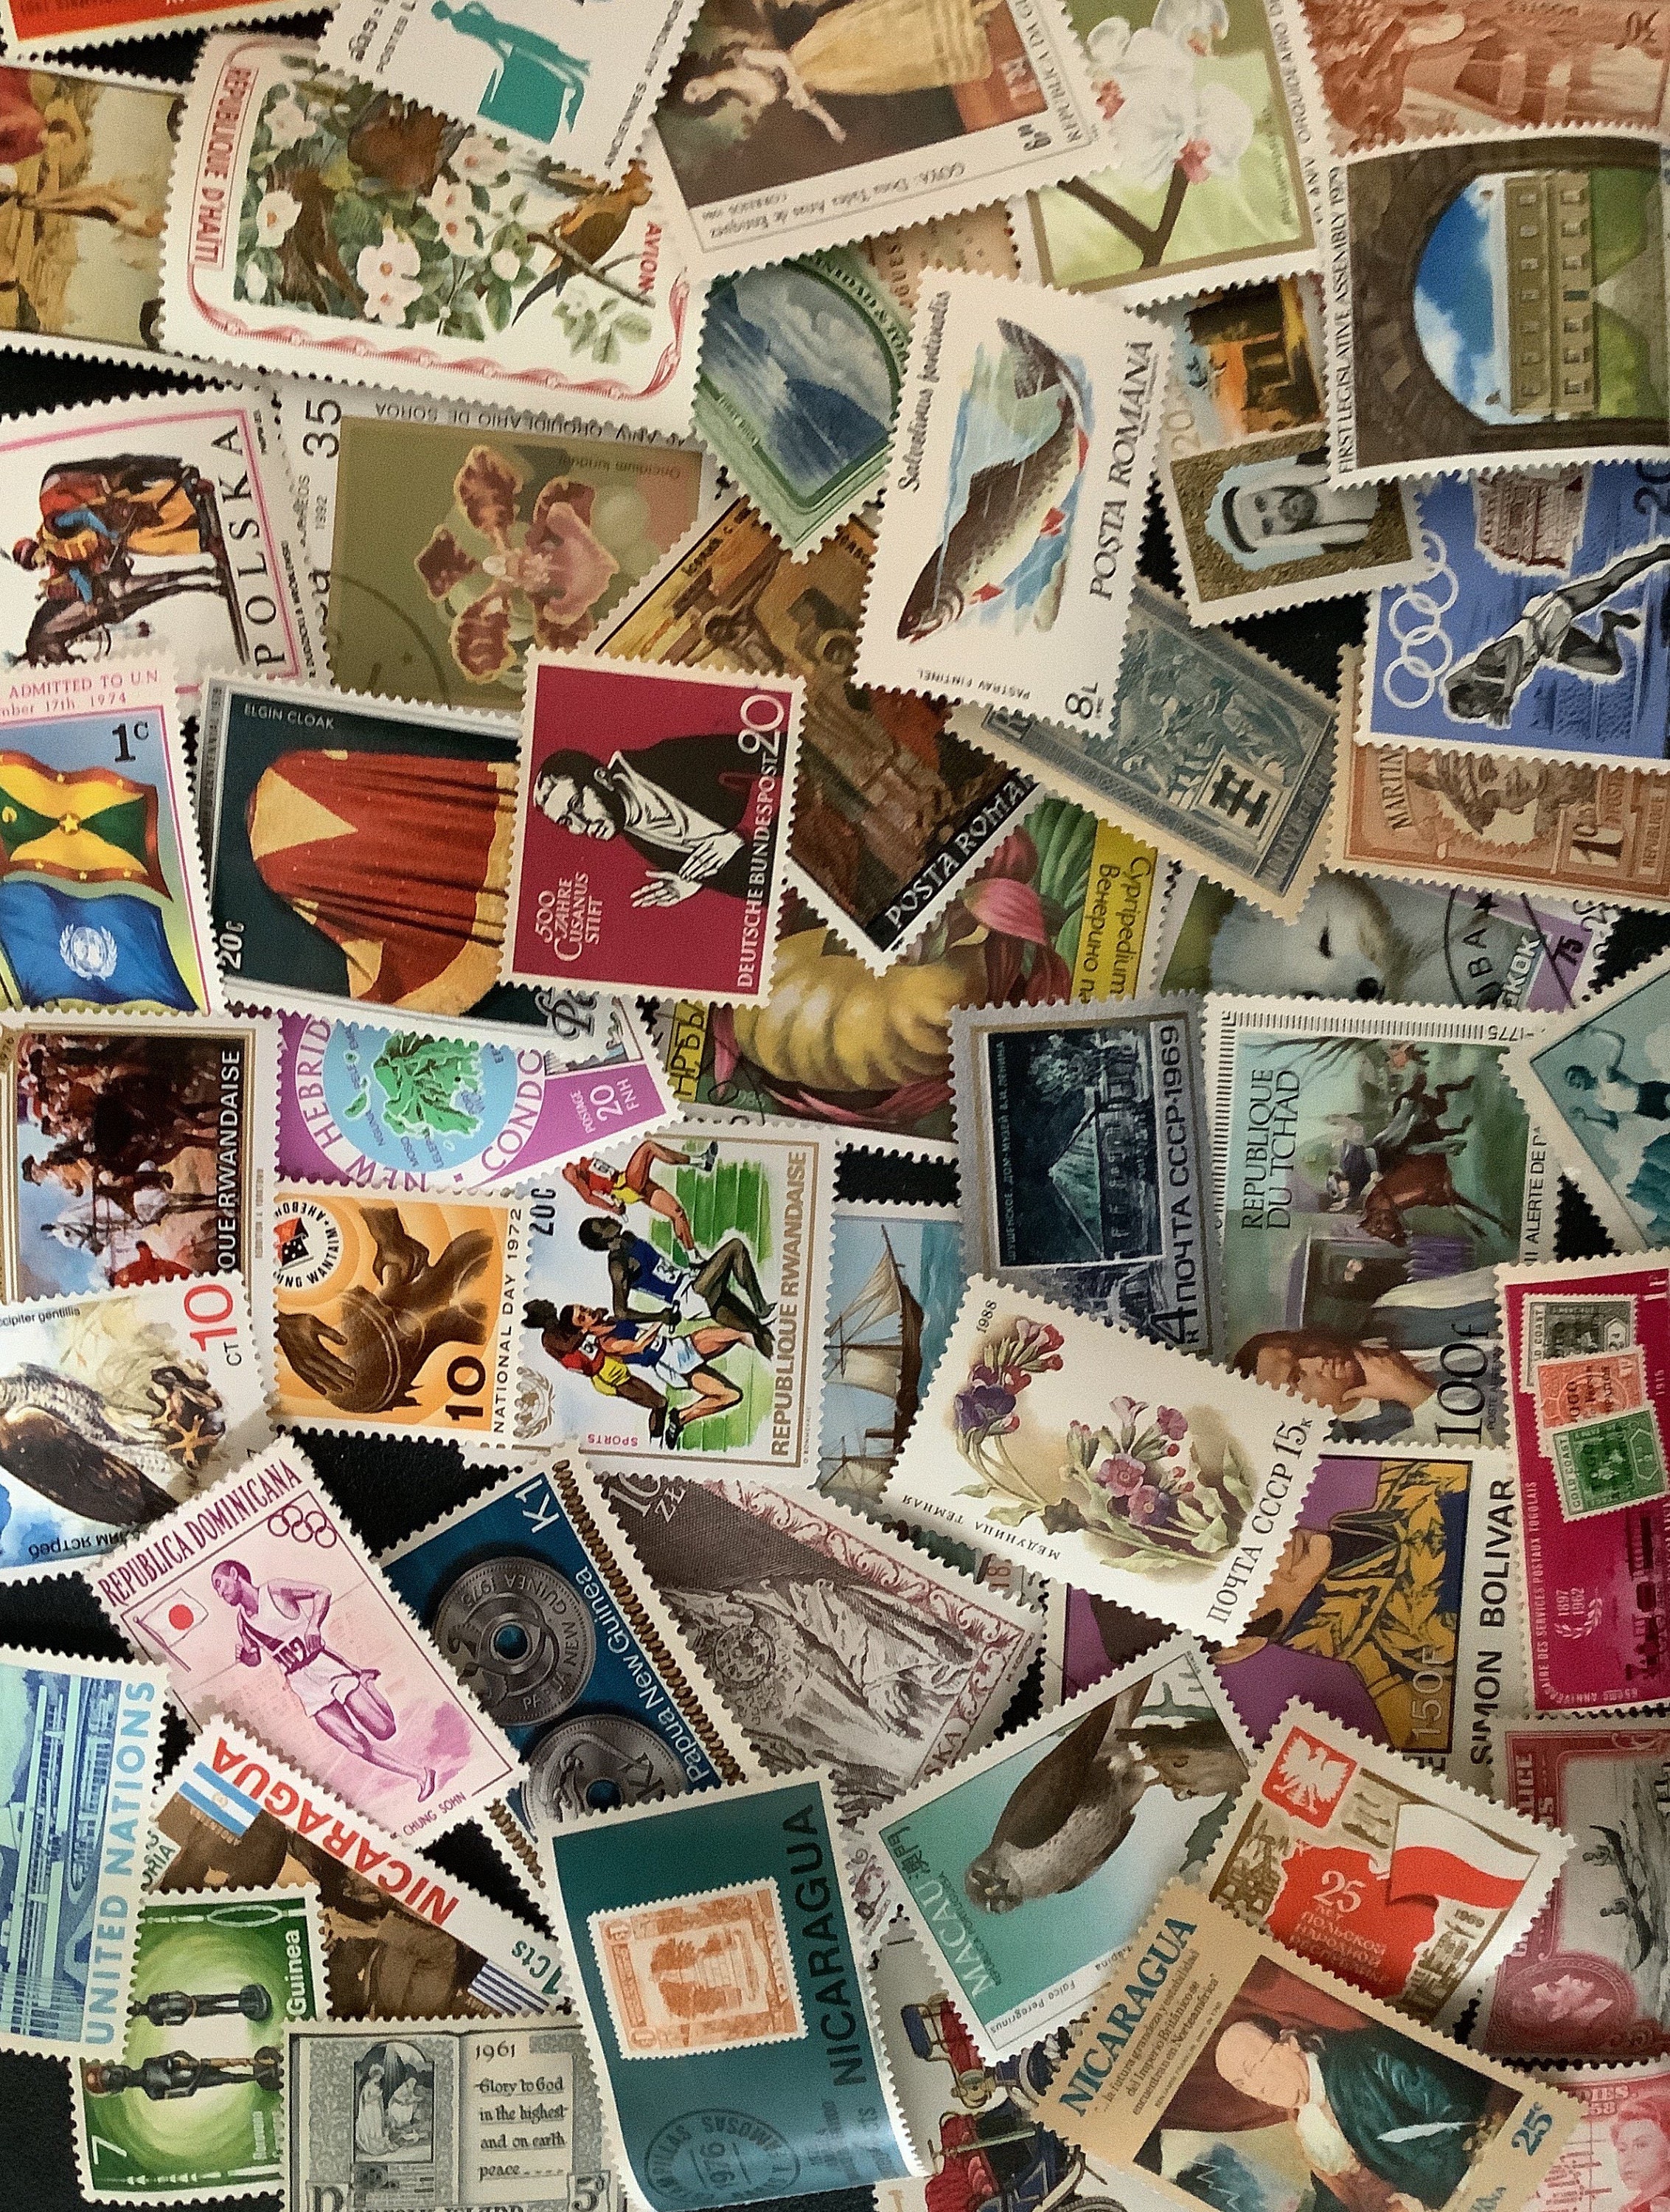 20 New Zealand Vintage Postage Stamps for Collectors or Crafting